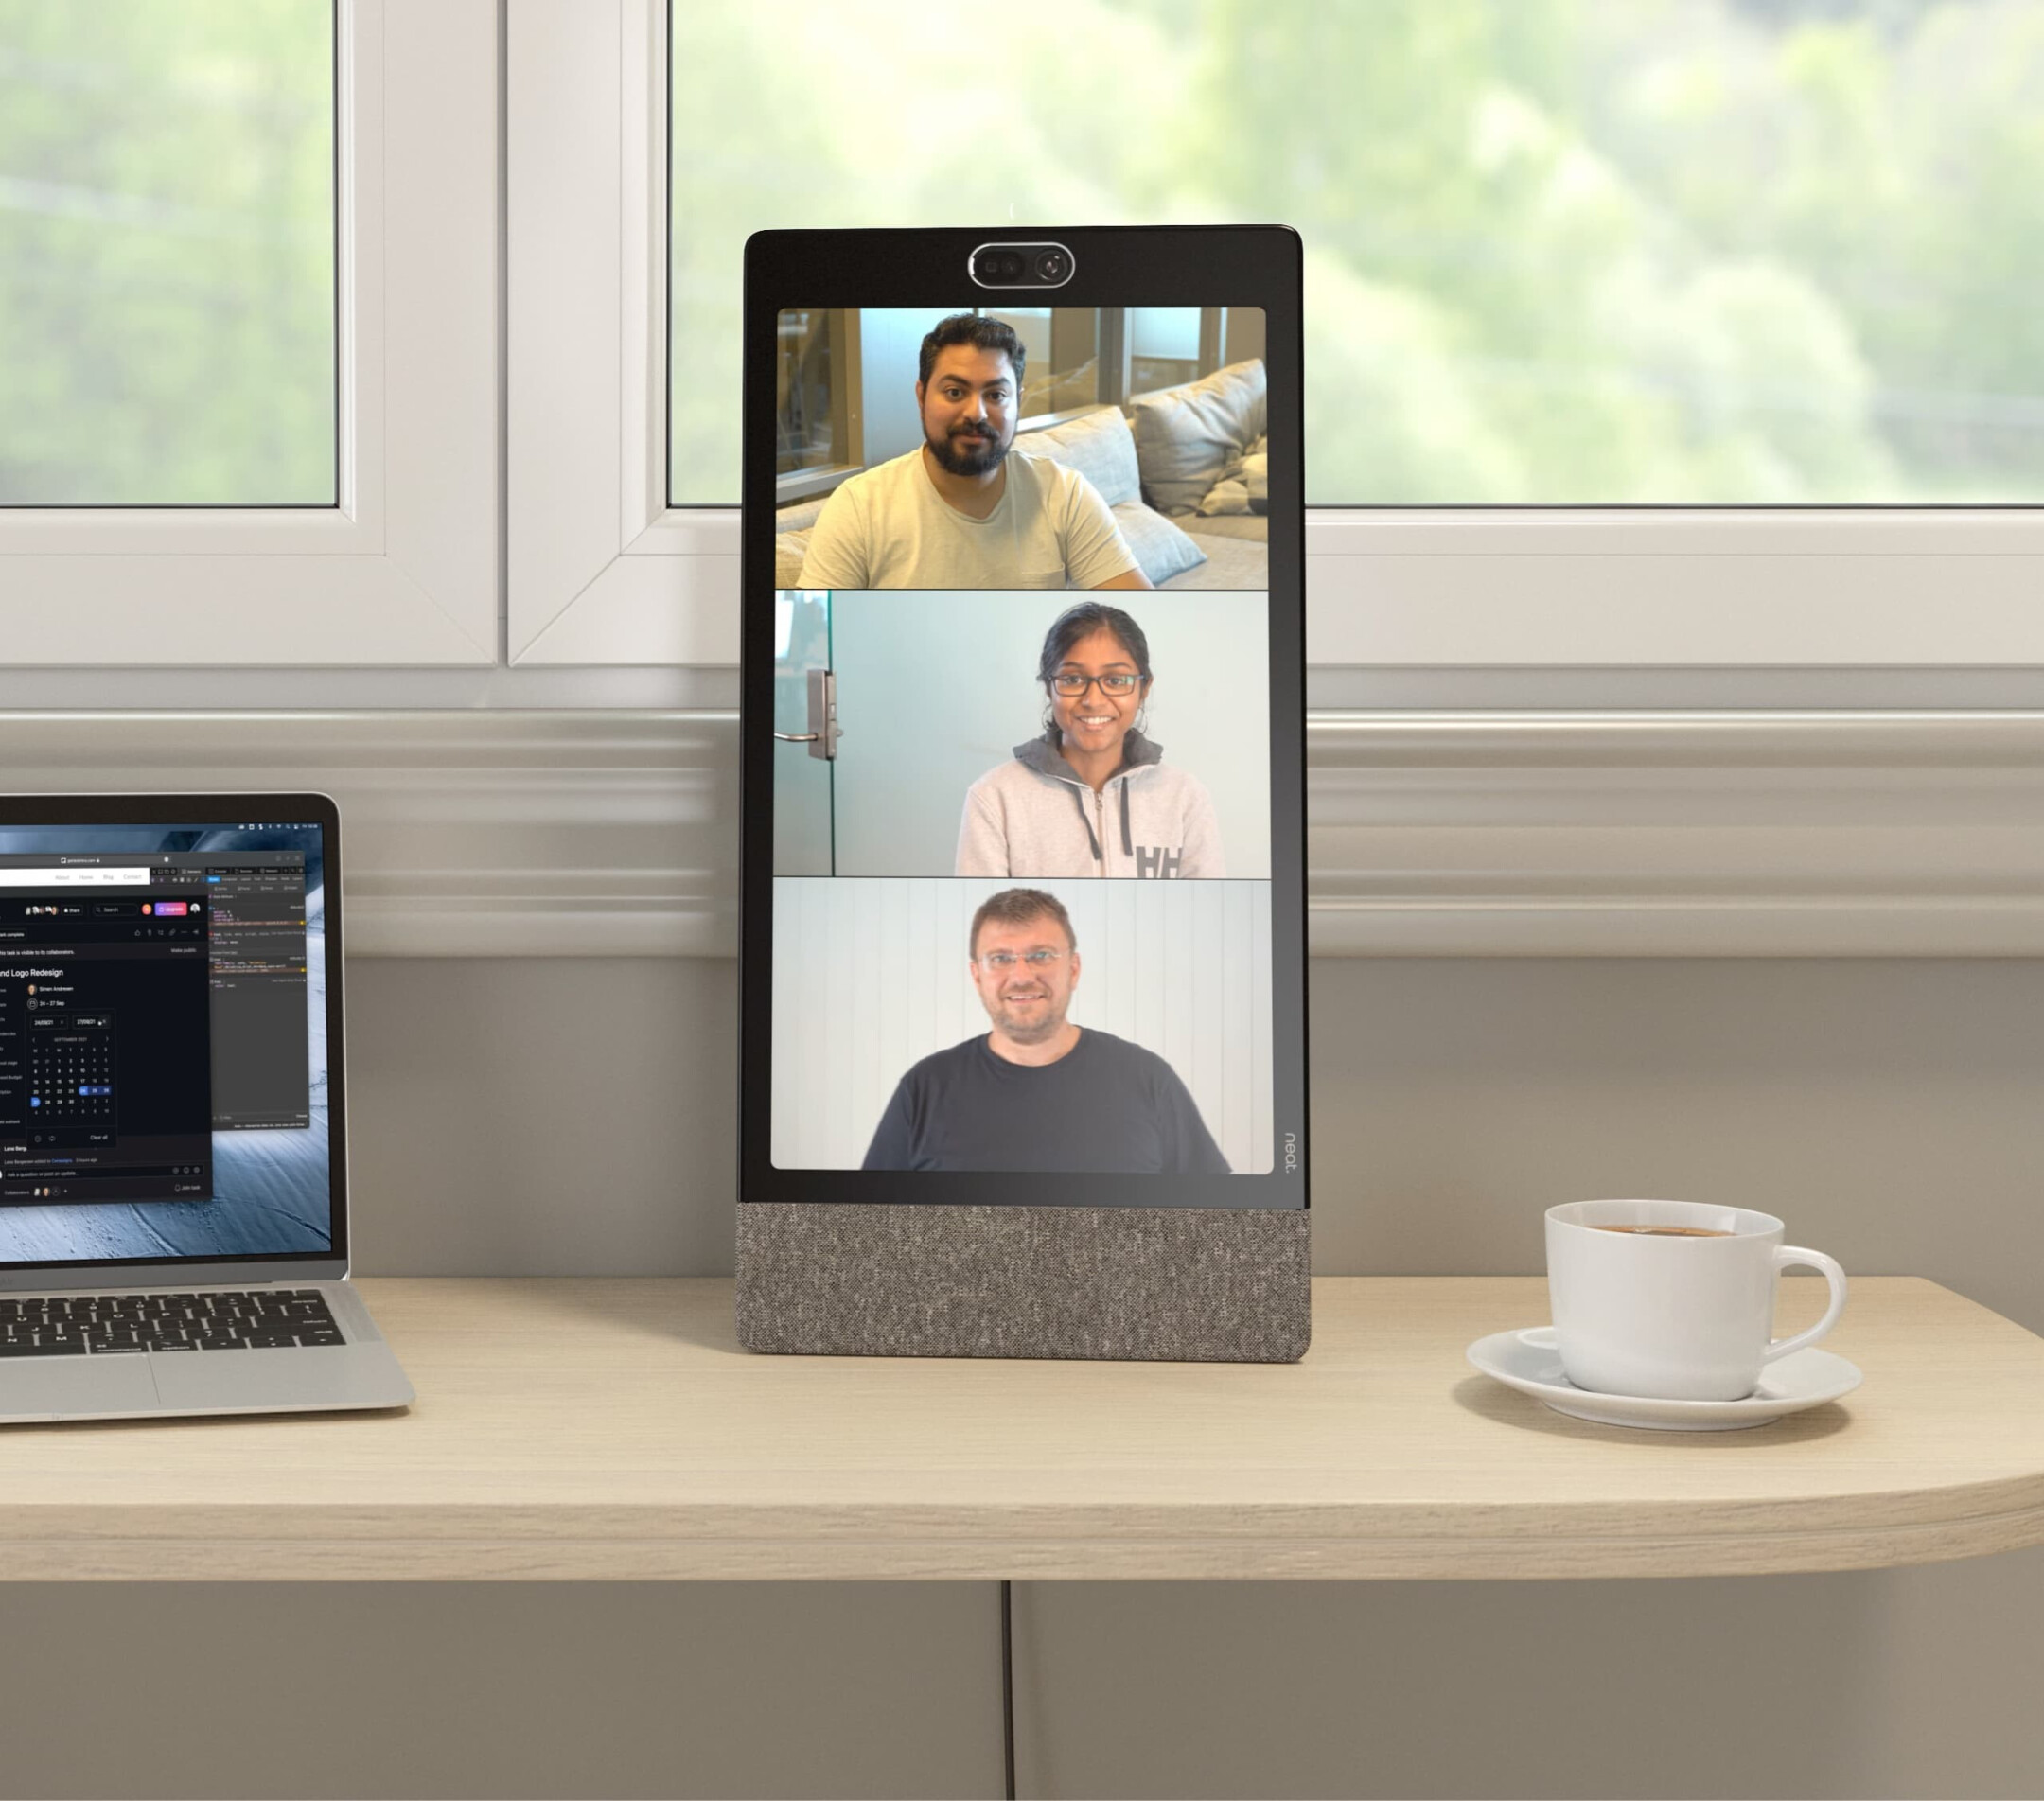 Neat Frame Personal Video Conferencing Device Designed for Zoom